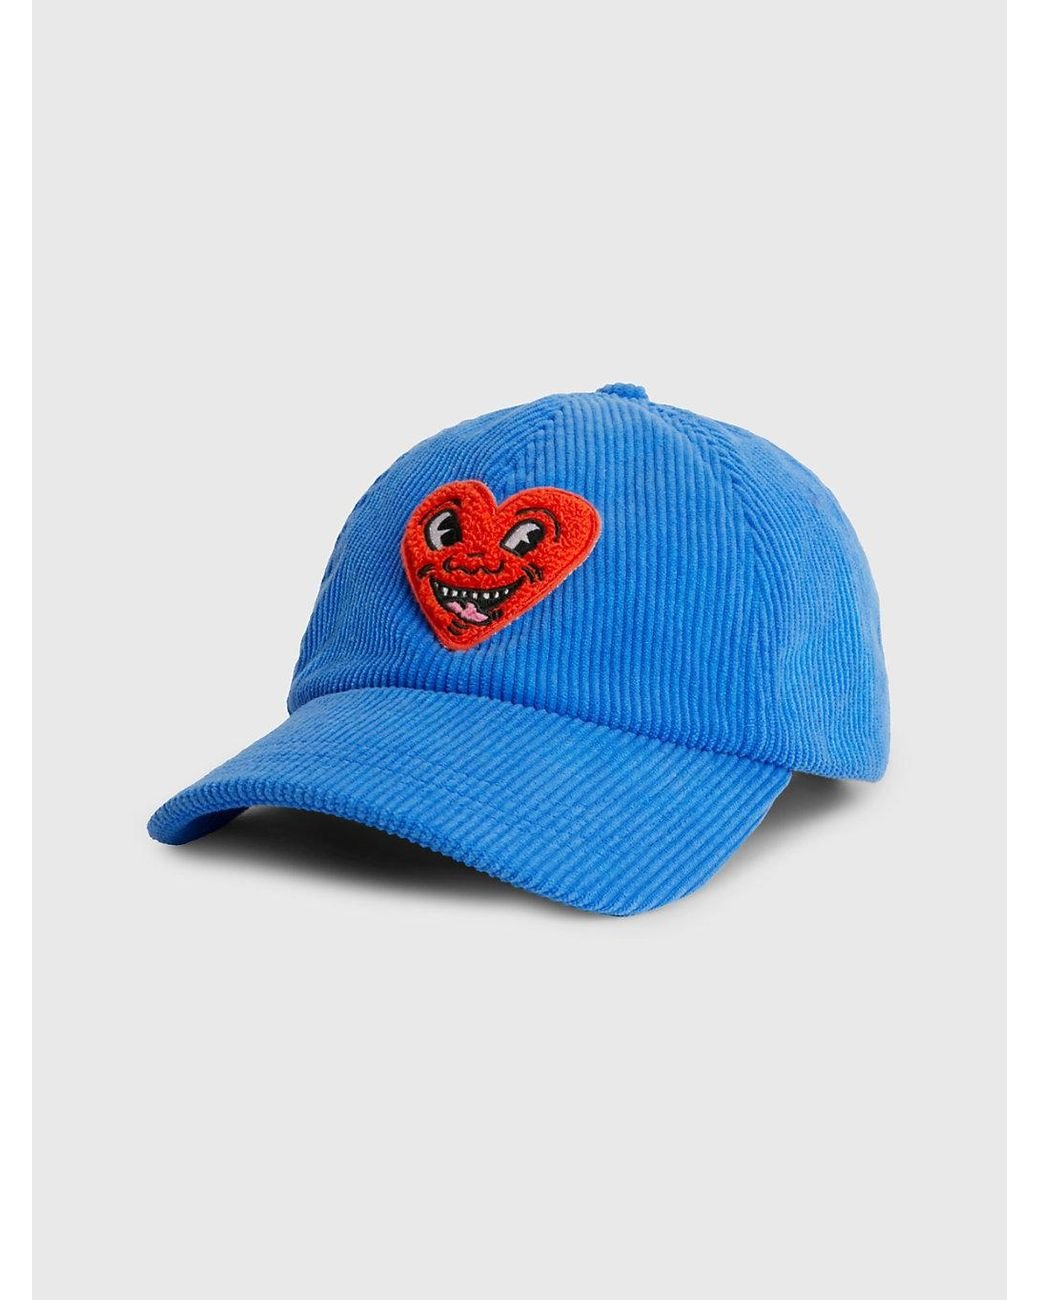 Tommy Hilfiger Tommy X Keith Haring Corduroy Baseball Cap in Blue | Lyst UK